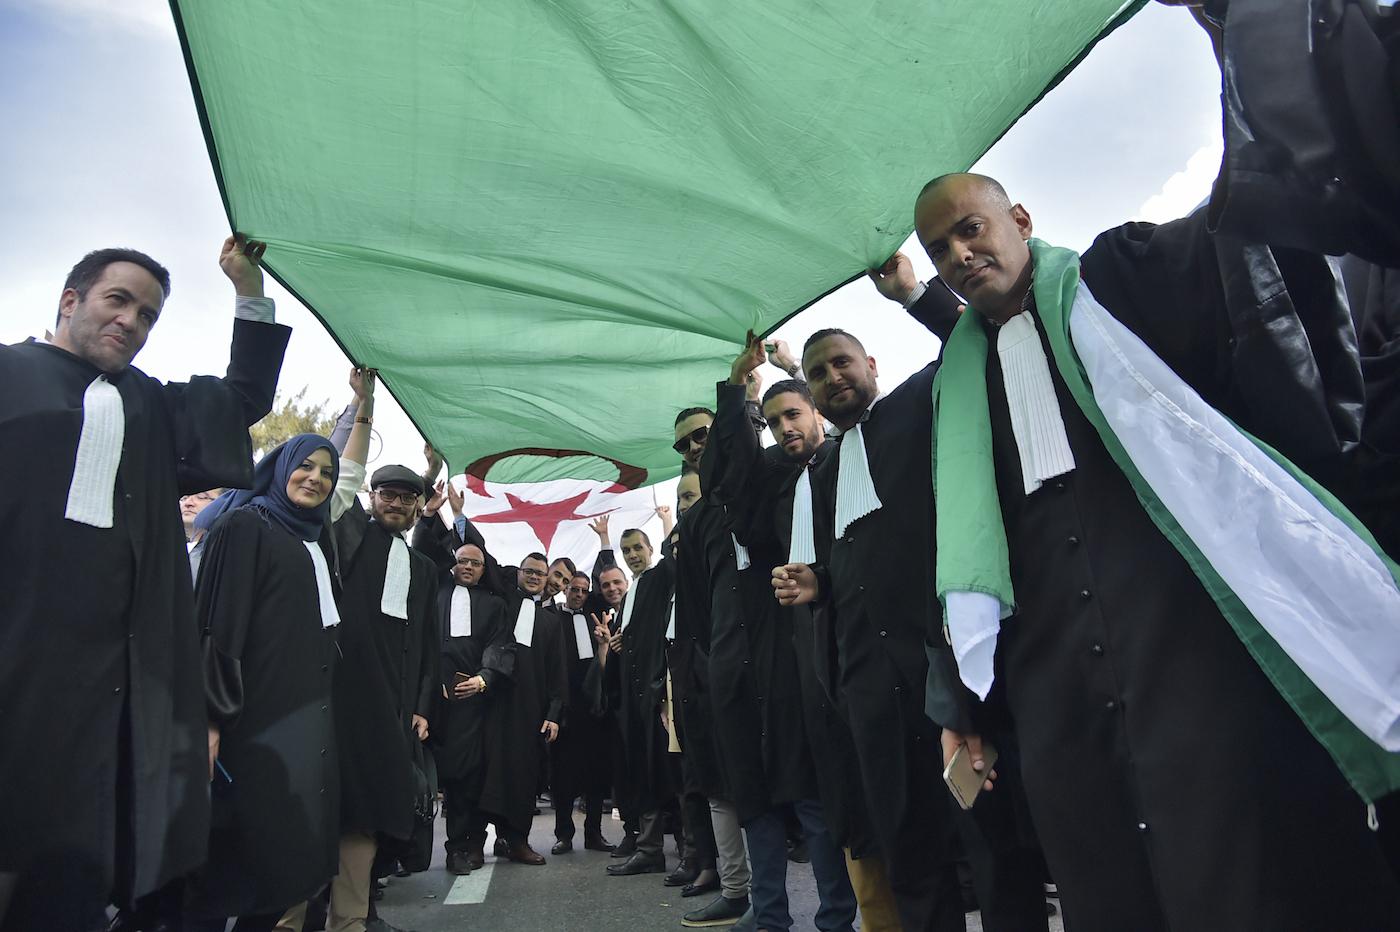 Lawyers protest against Abdelaziz Bouteflika's candidacy in Algiers on 7 March (AFP)